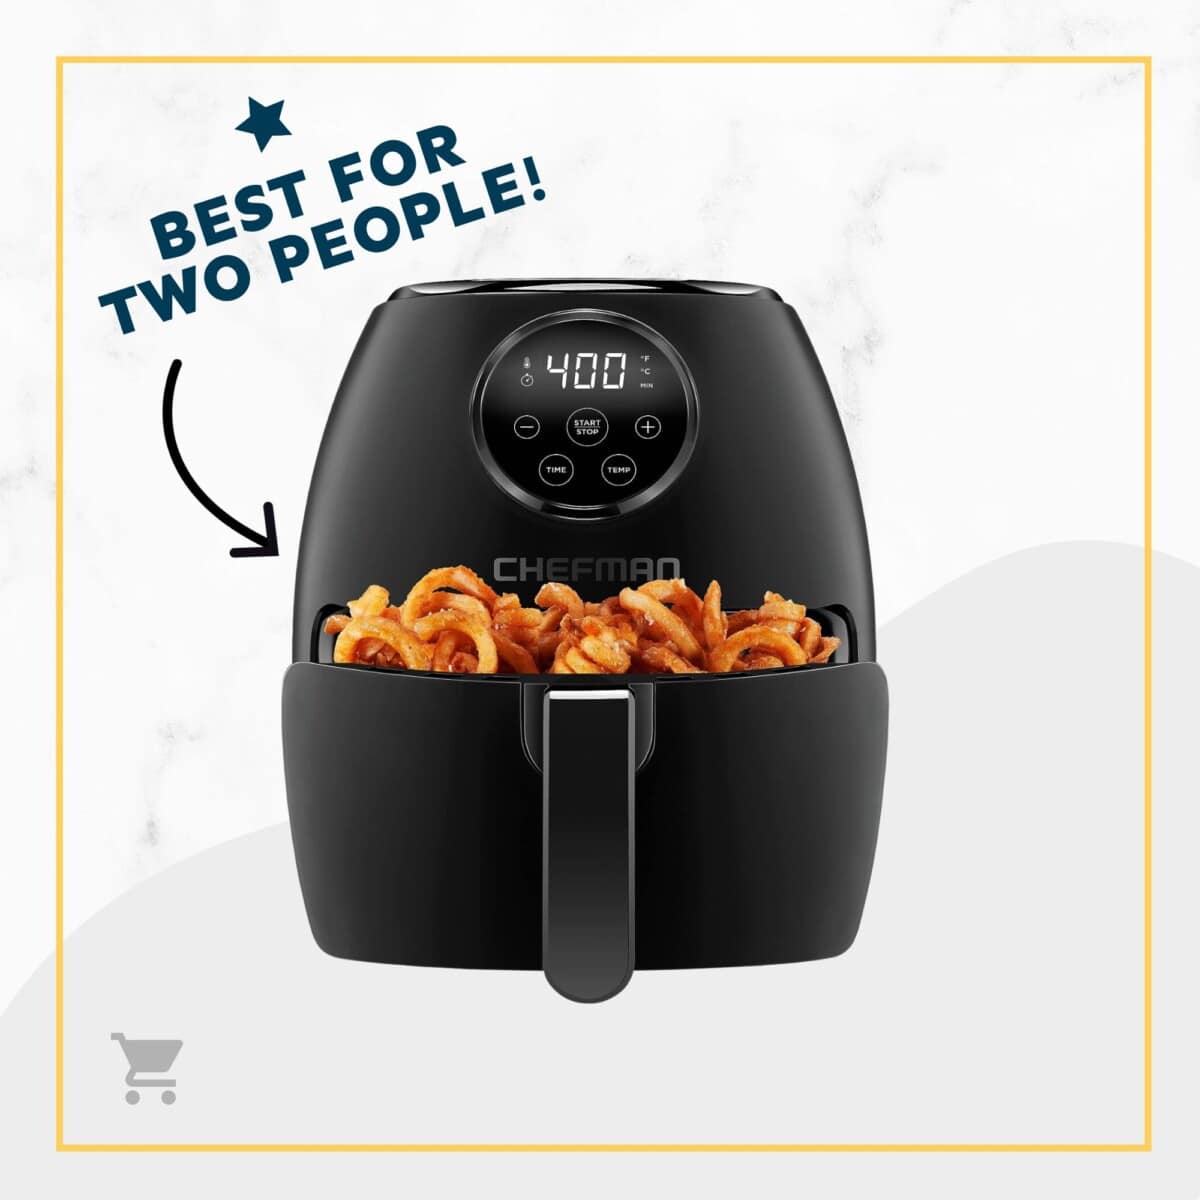 https://www.thecookierookie.com/wp-content/uploads/2023/08/best-for-two-people-small-air-fryer-1200x1200.jpg